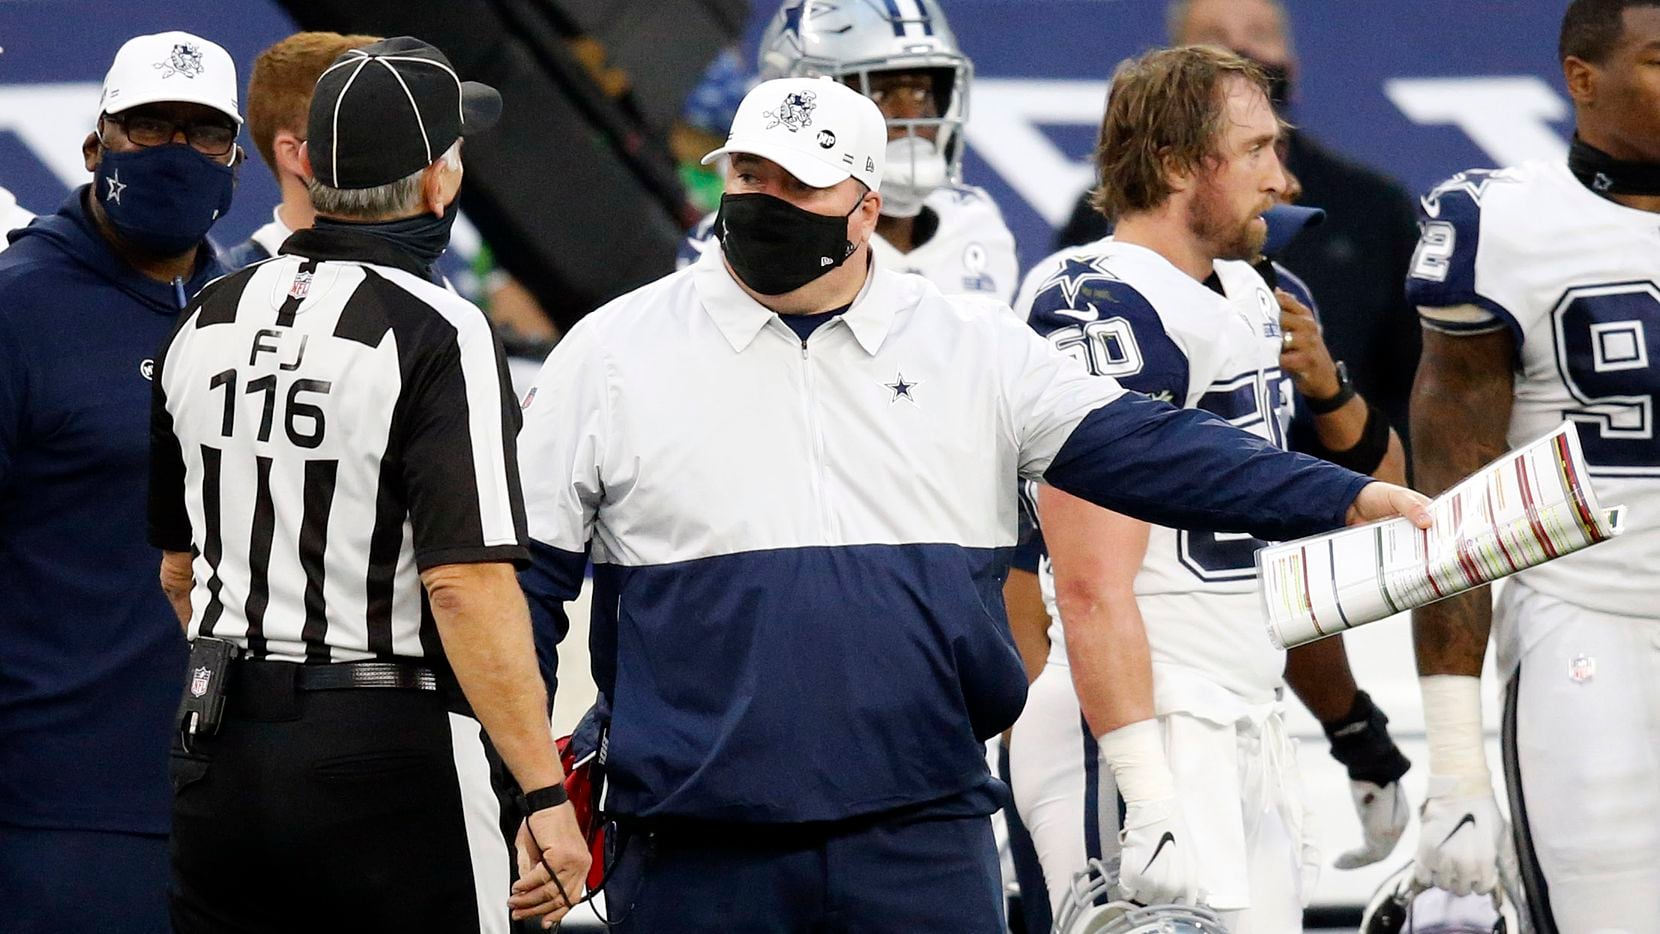 Dallas Cowboys head coach Mike McCarthy makes his case on a call with field judge Mike Weatherford (116) during the second quarter against the Washington Football Team at AT&T Stadium in Arlington, Thursday, November 26, 2020.